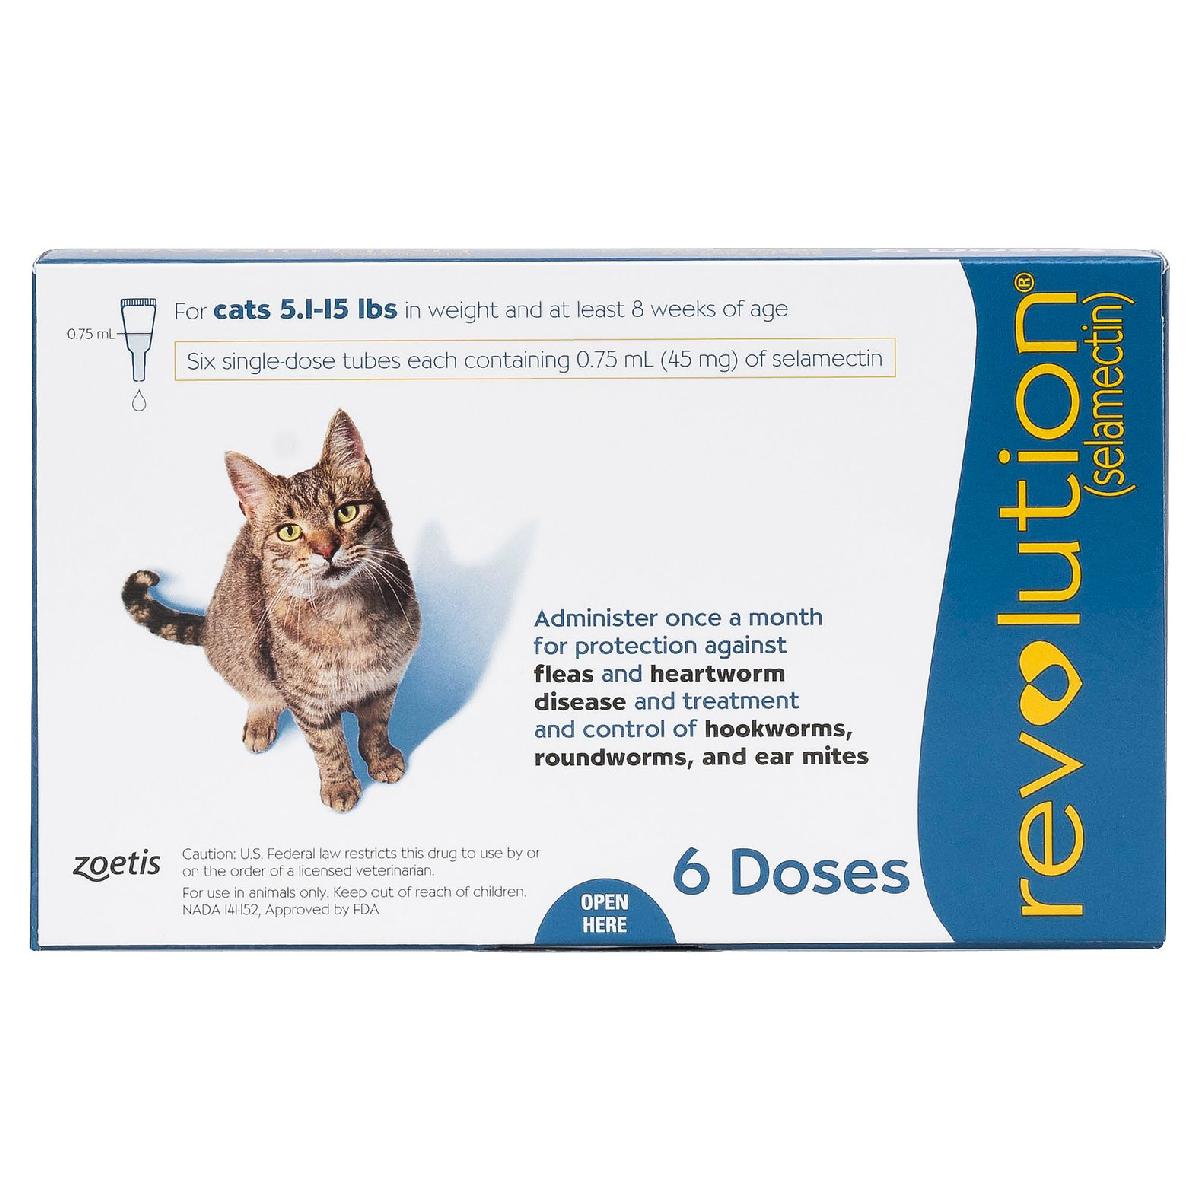 revolution-cats-5-1-15-lbs-6-doses-45-mg-selamectin-pet-supplies